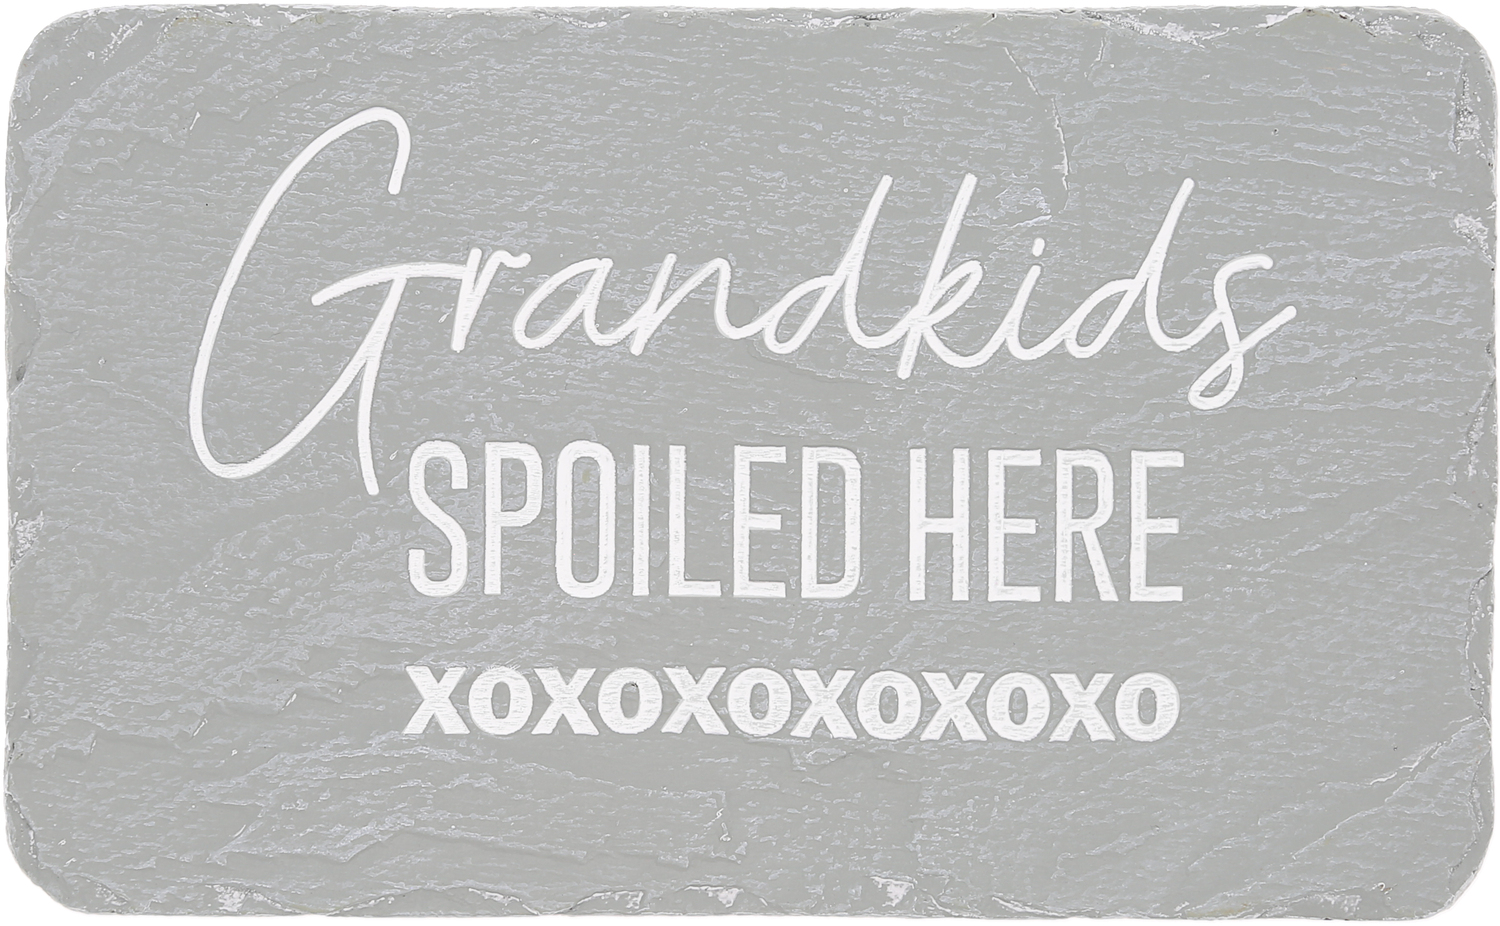 Spoiled Grandkids by Stones with Stories - Spoiled Grandkids - 7" x 4.25" Garden Stone